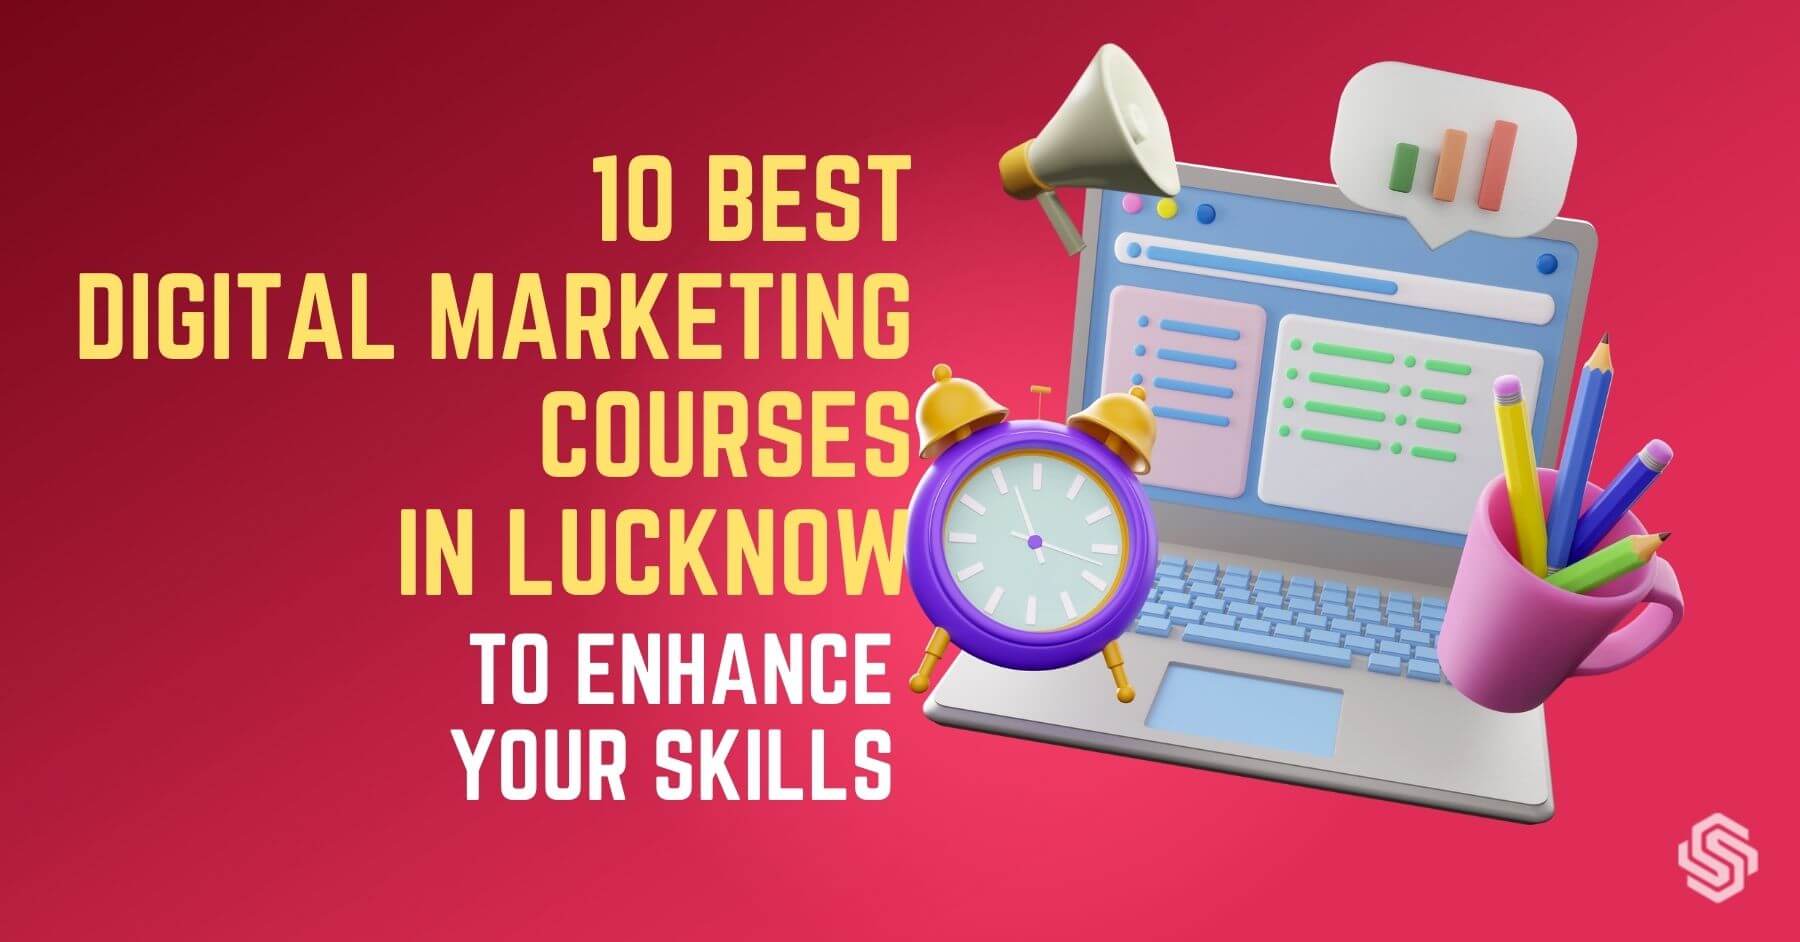 10 Best Digital Marketing Courses In Lucknow To Enhance Your Skills